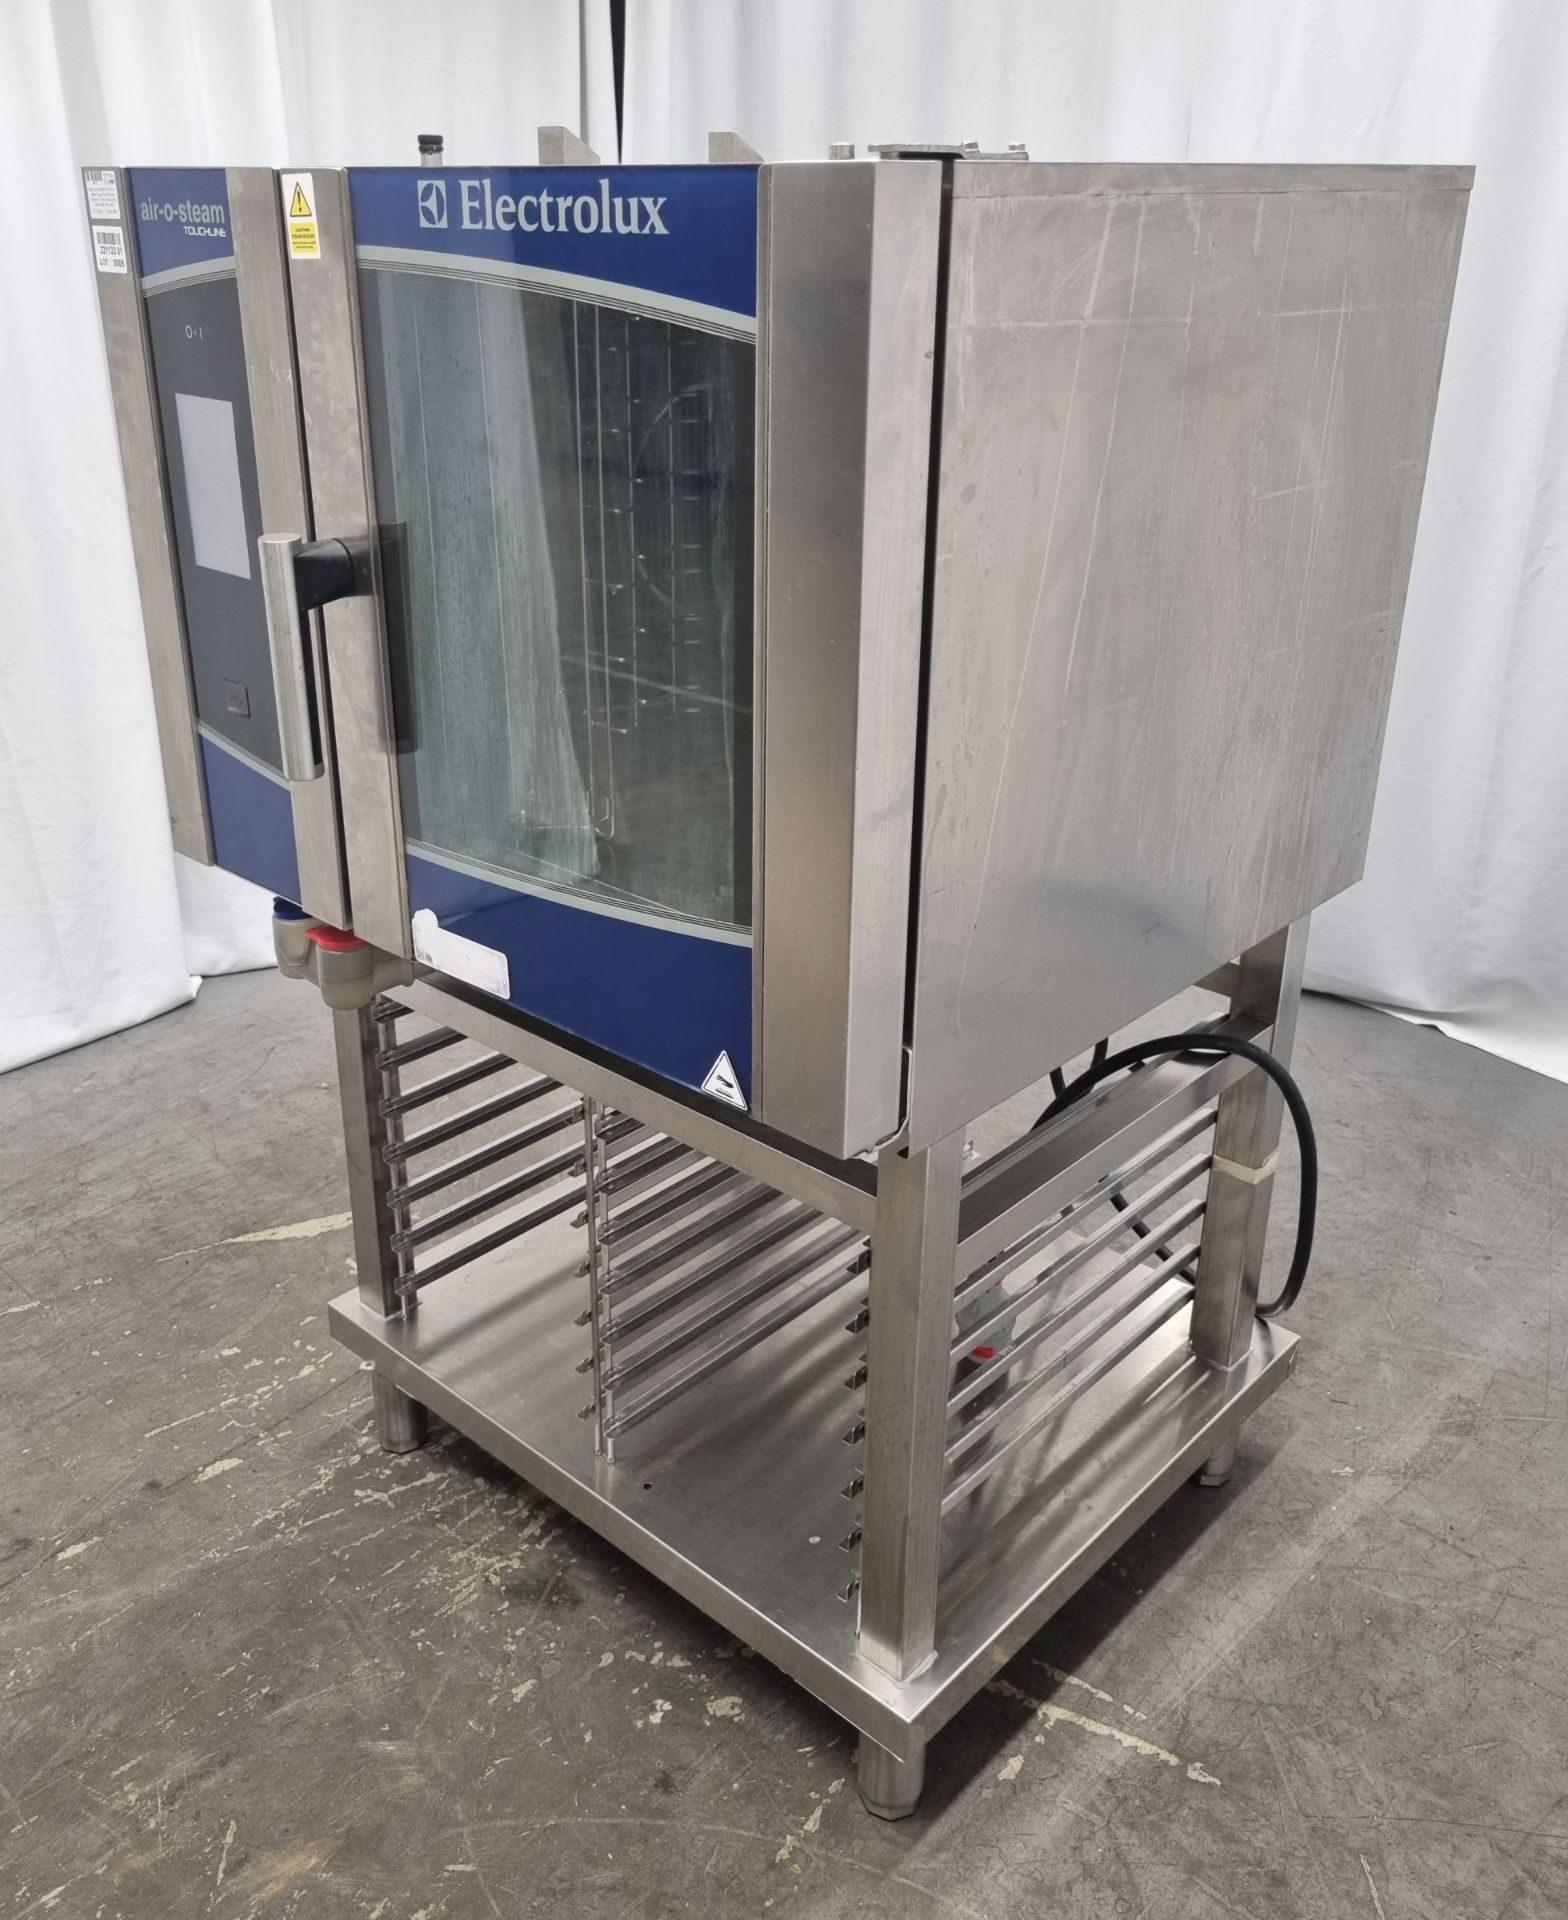 Electrolux AOS061ETKI Air-o-Steam touchline 400 volts 50/60hz 17.5kw 25 amp with underneath tray - Image 2 of 11